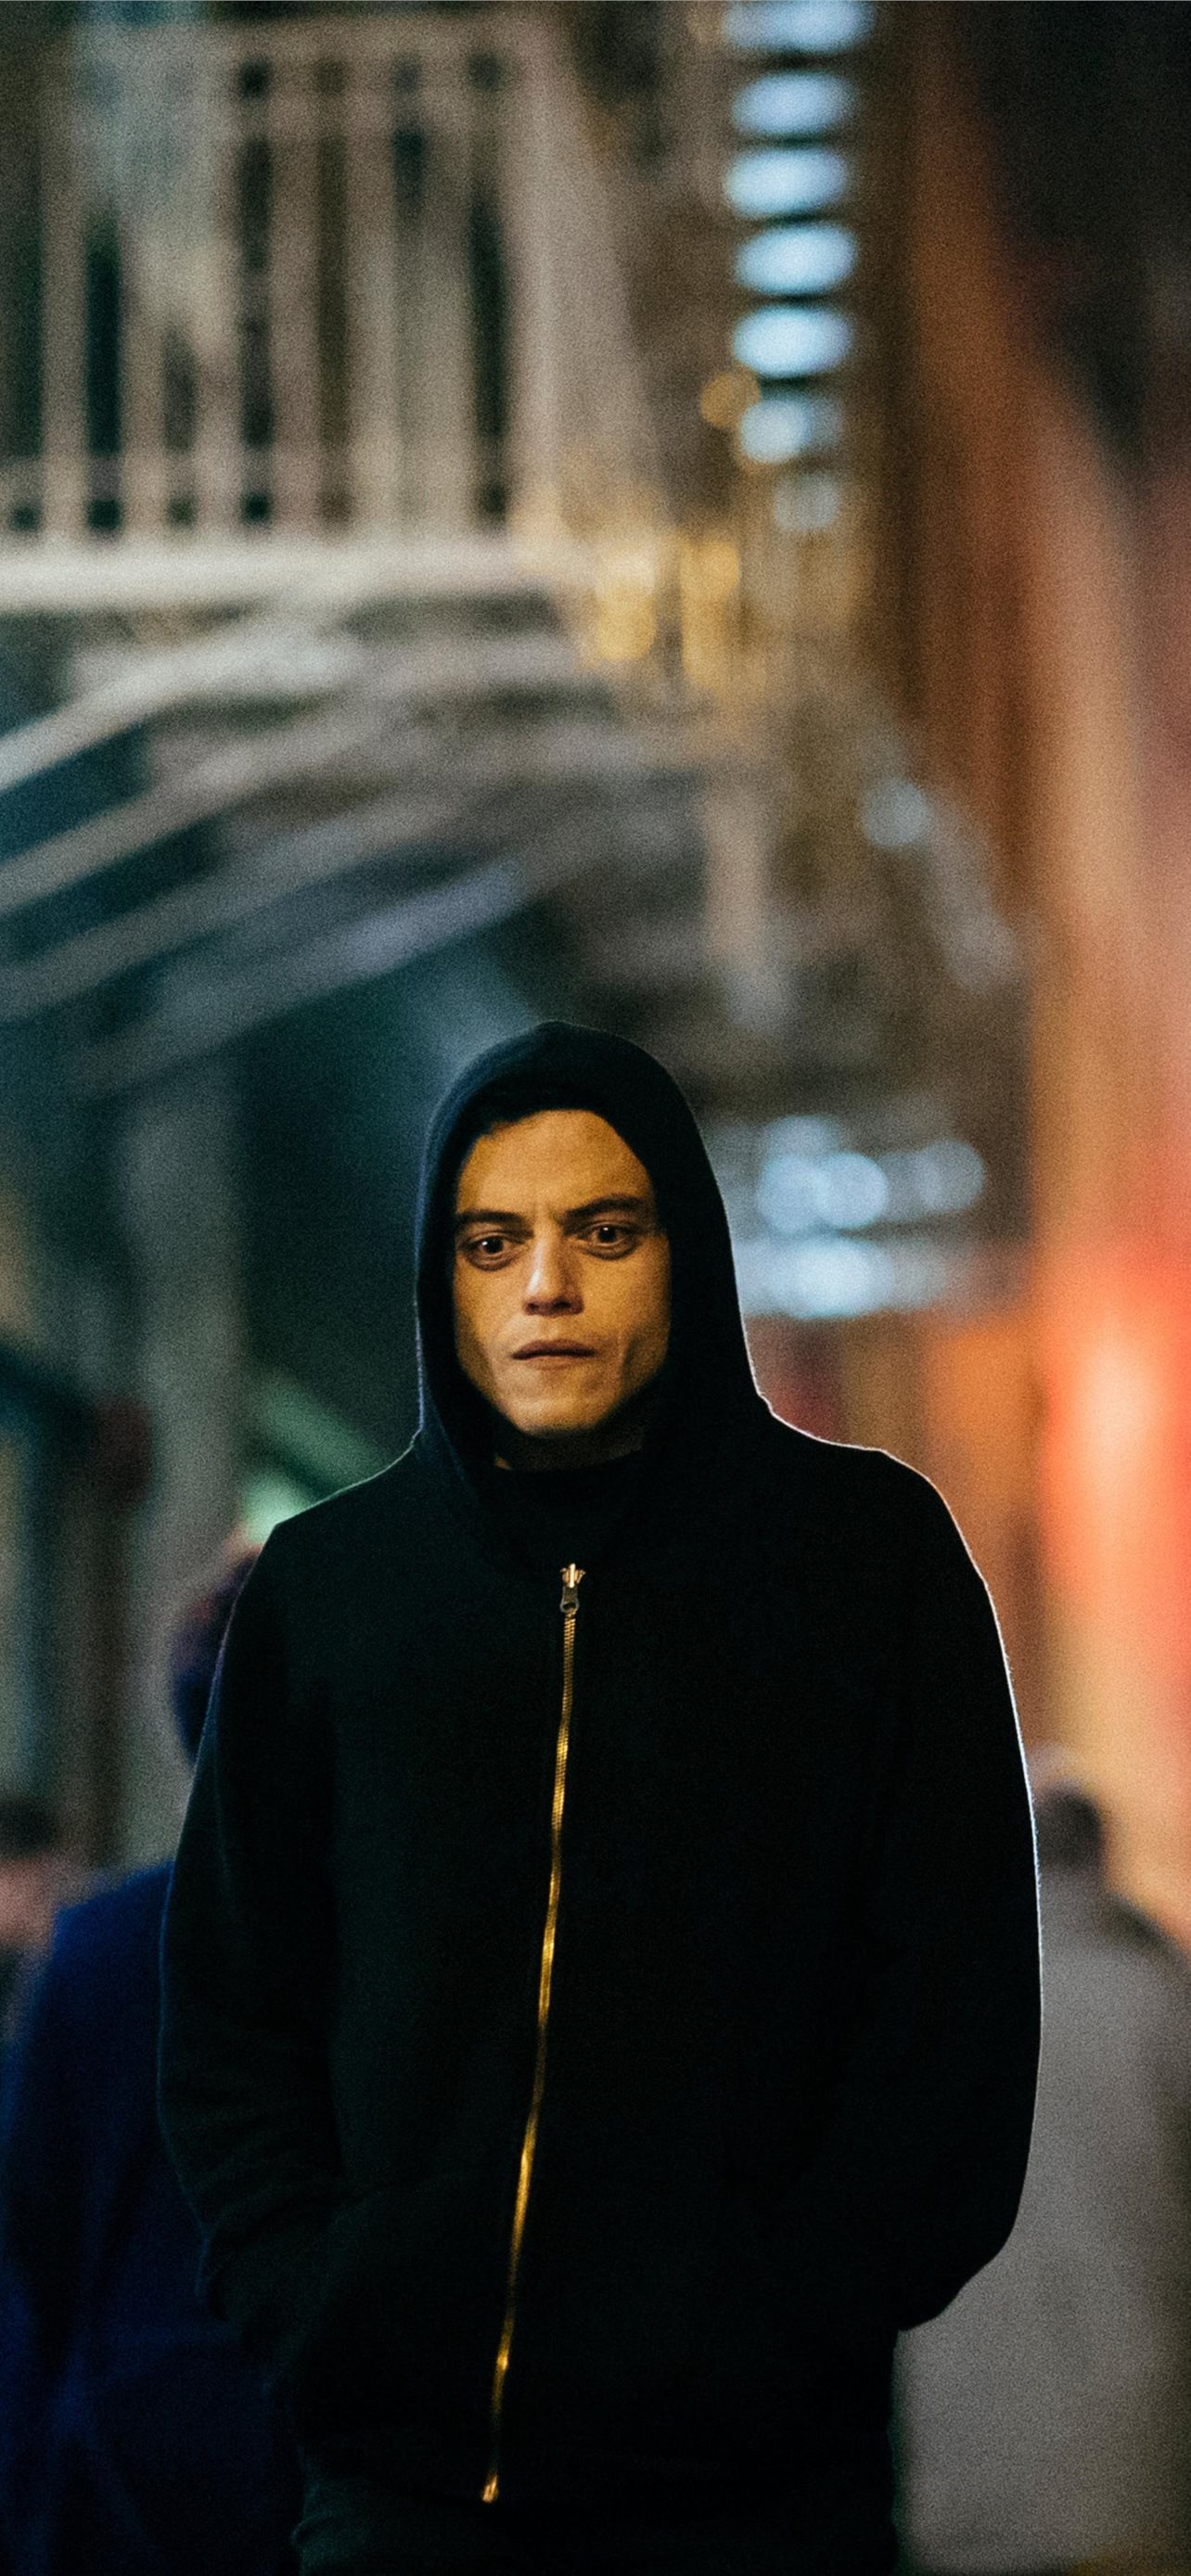 Mr Robot Wallpapers,Images,Backgrounds,Photos and Pictures